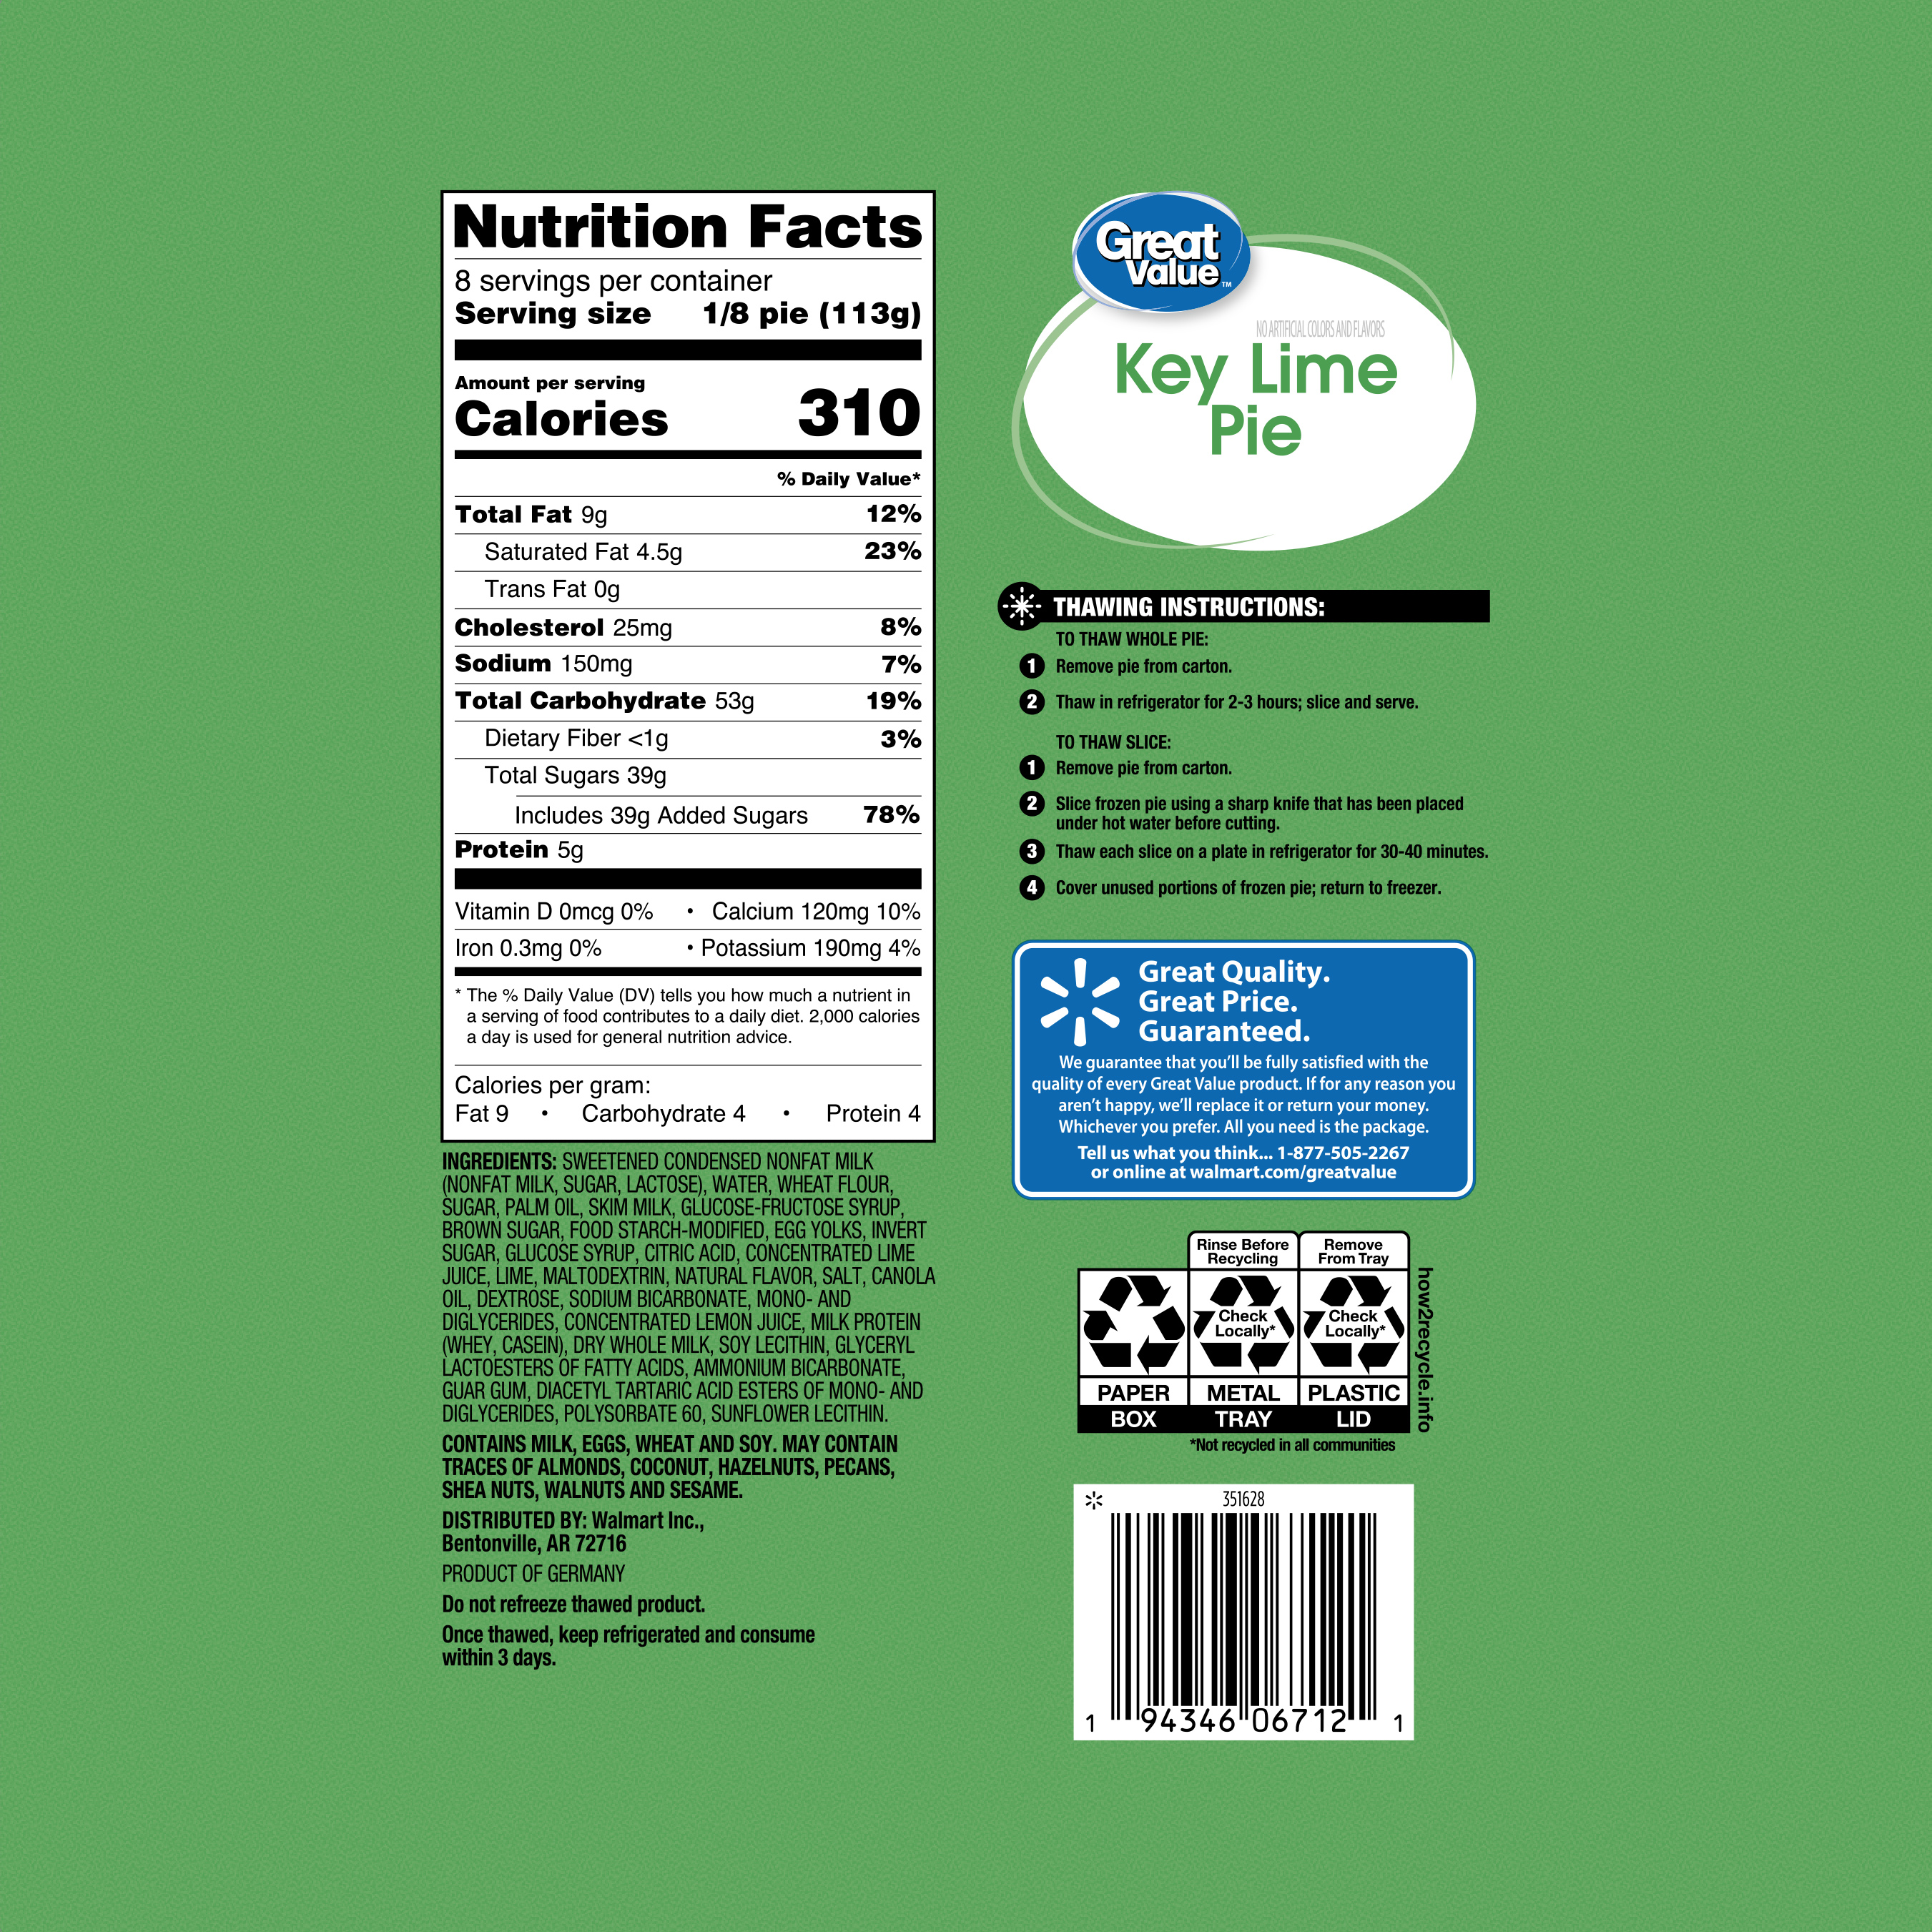 Great Value Key Lime Pie, Frozen Dessert, 32 oz, Made with Real Key Lime, No HFCS, Box (Frozen) - image 2 of 5